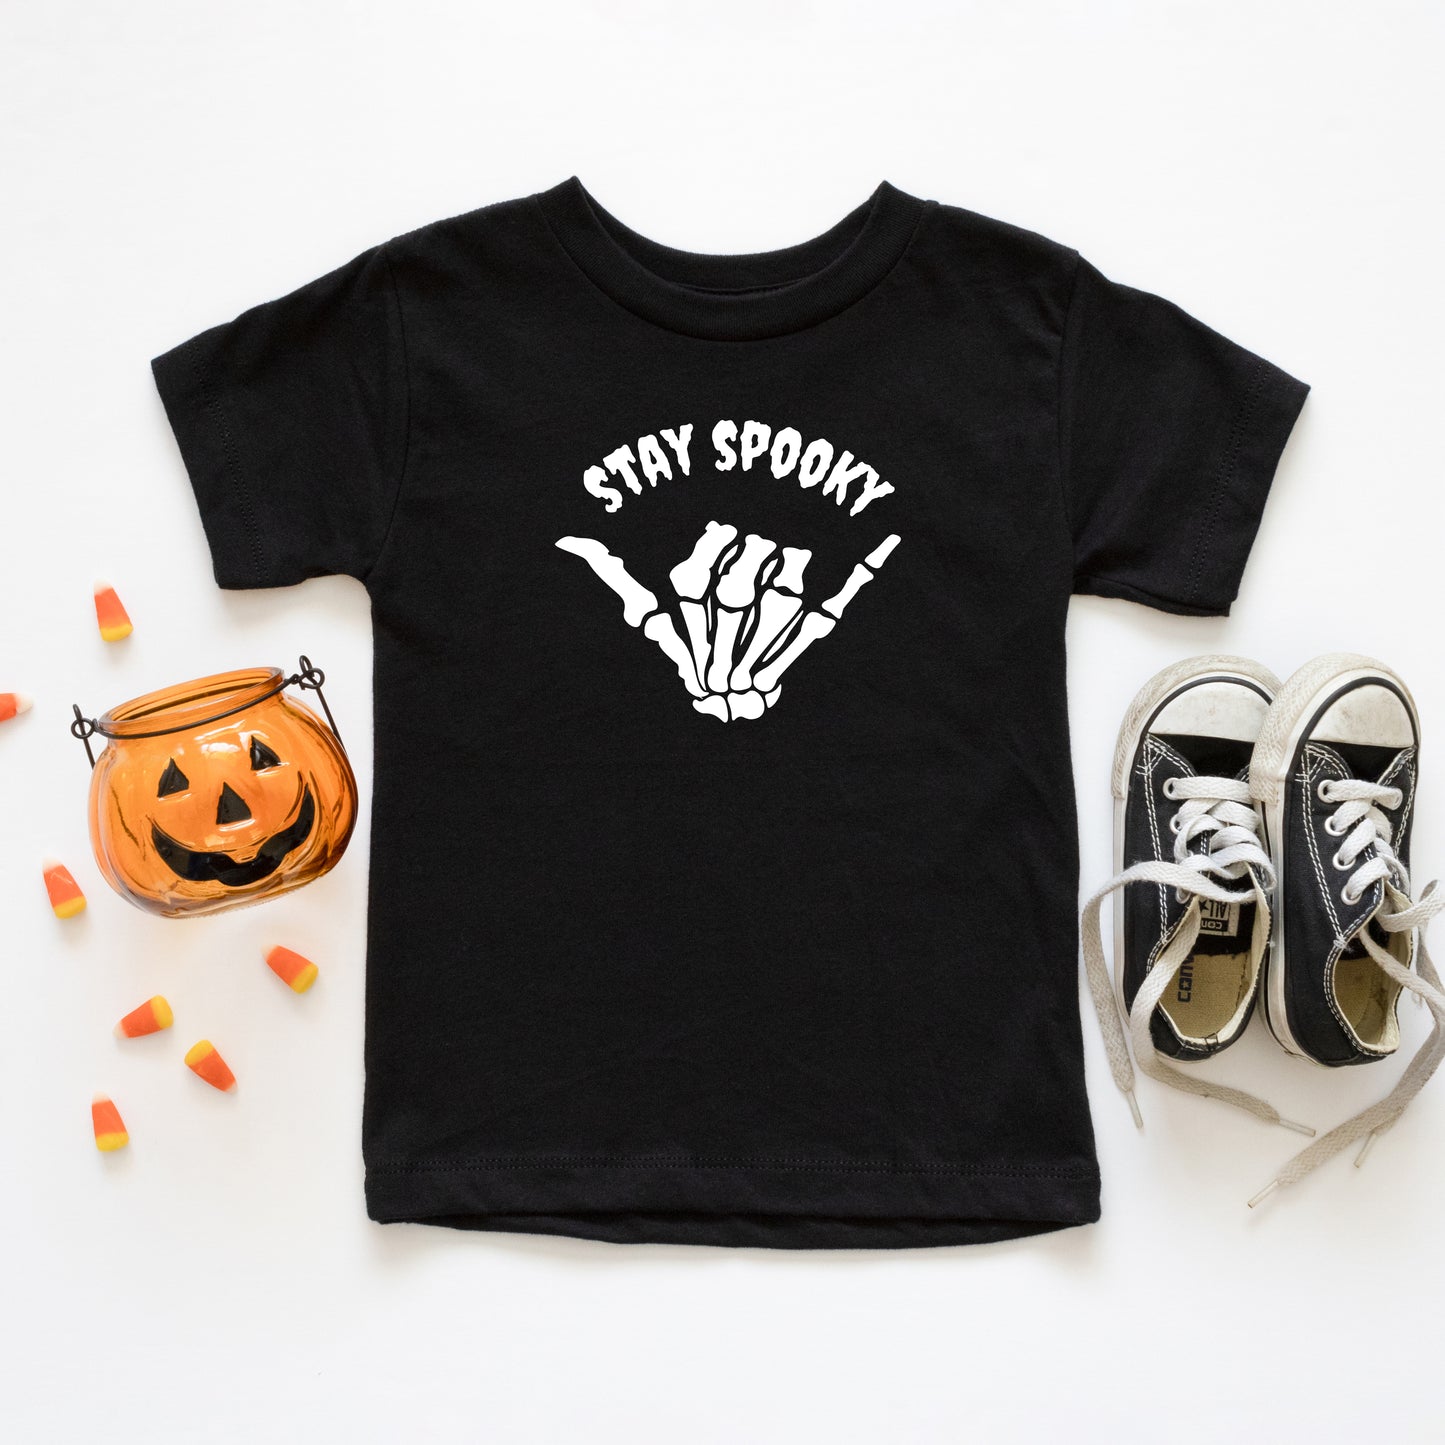 Stay Spooky Hand | Toddler Short Sleeve Crew Neck